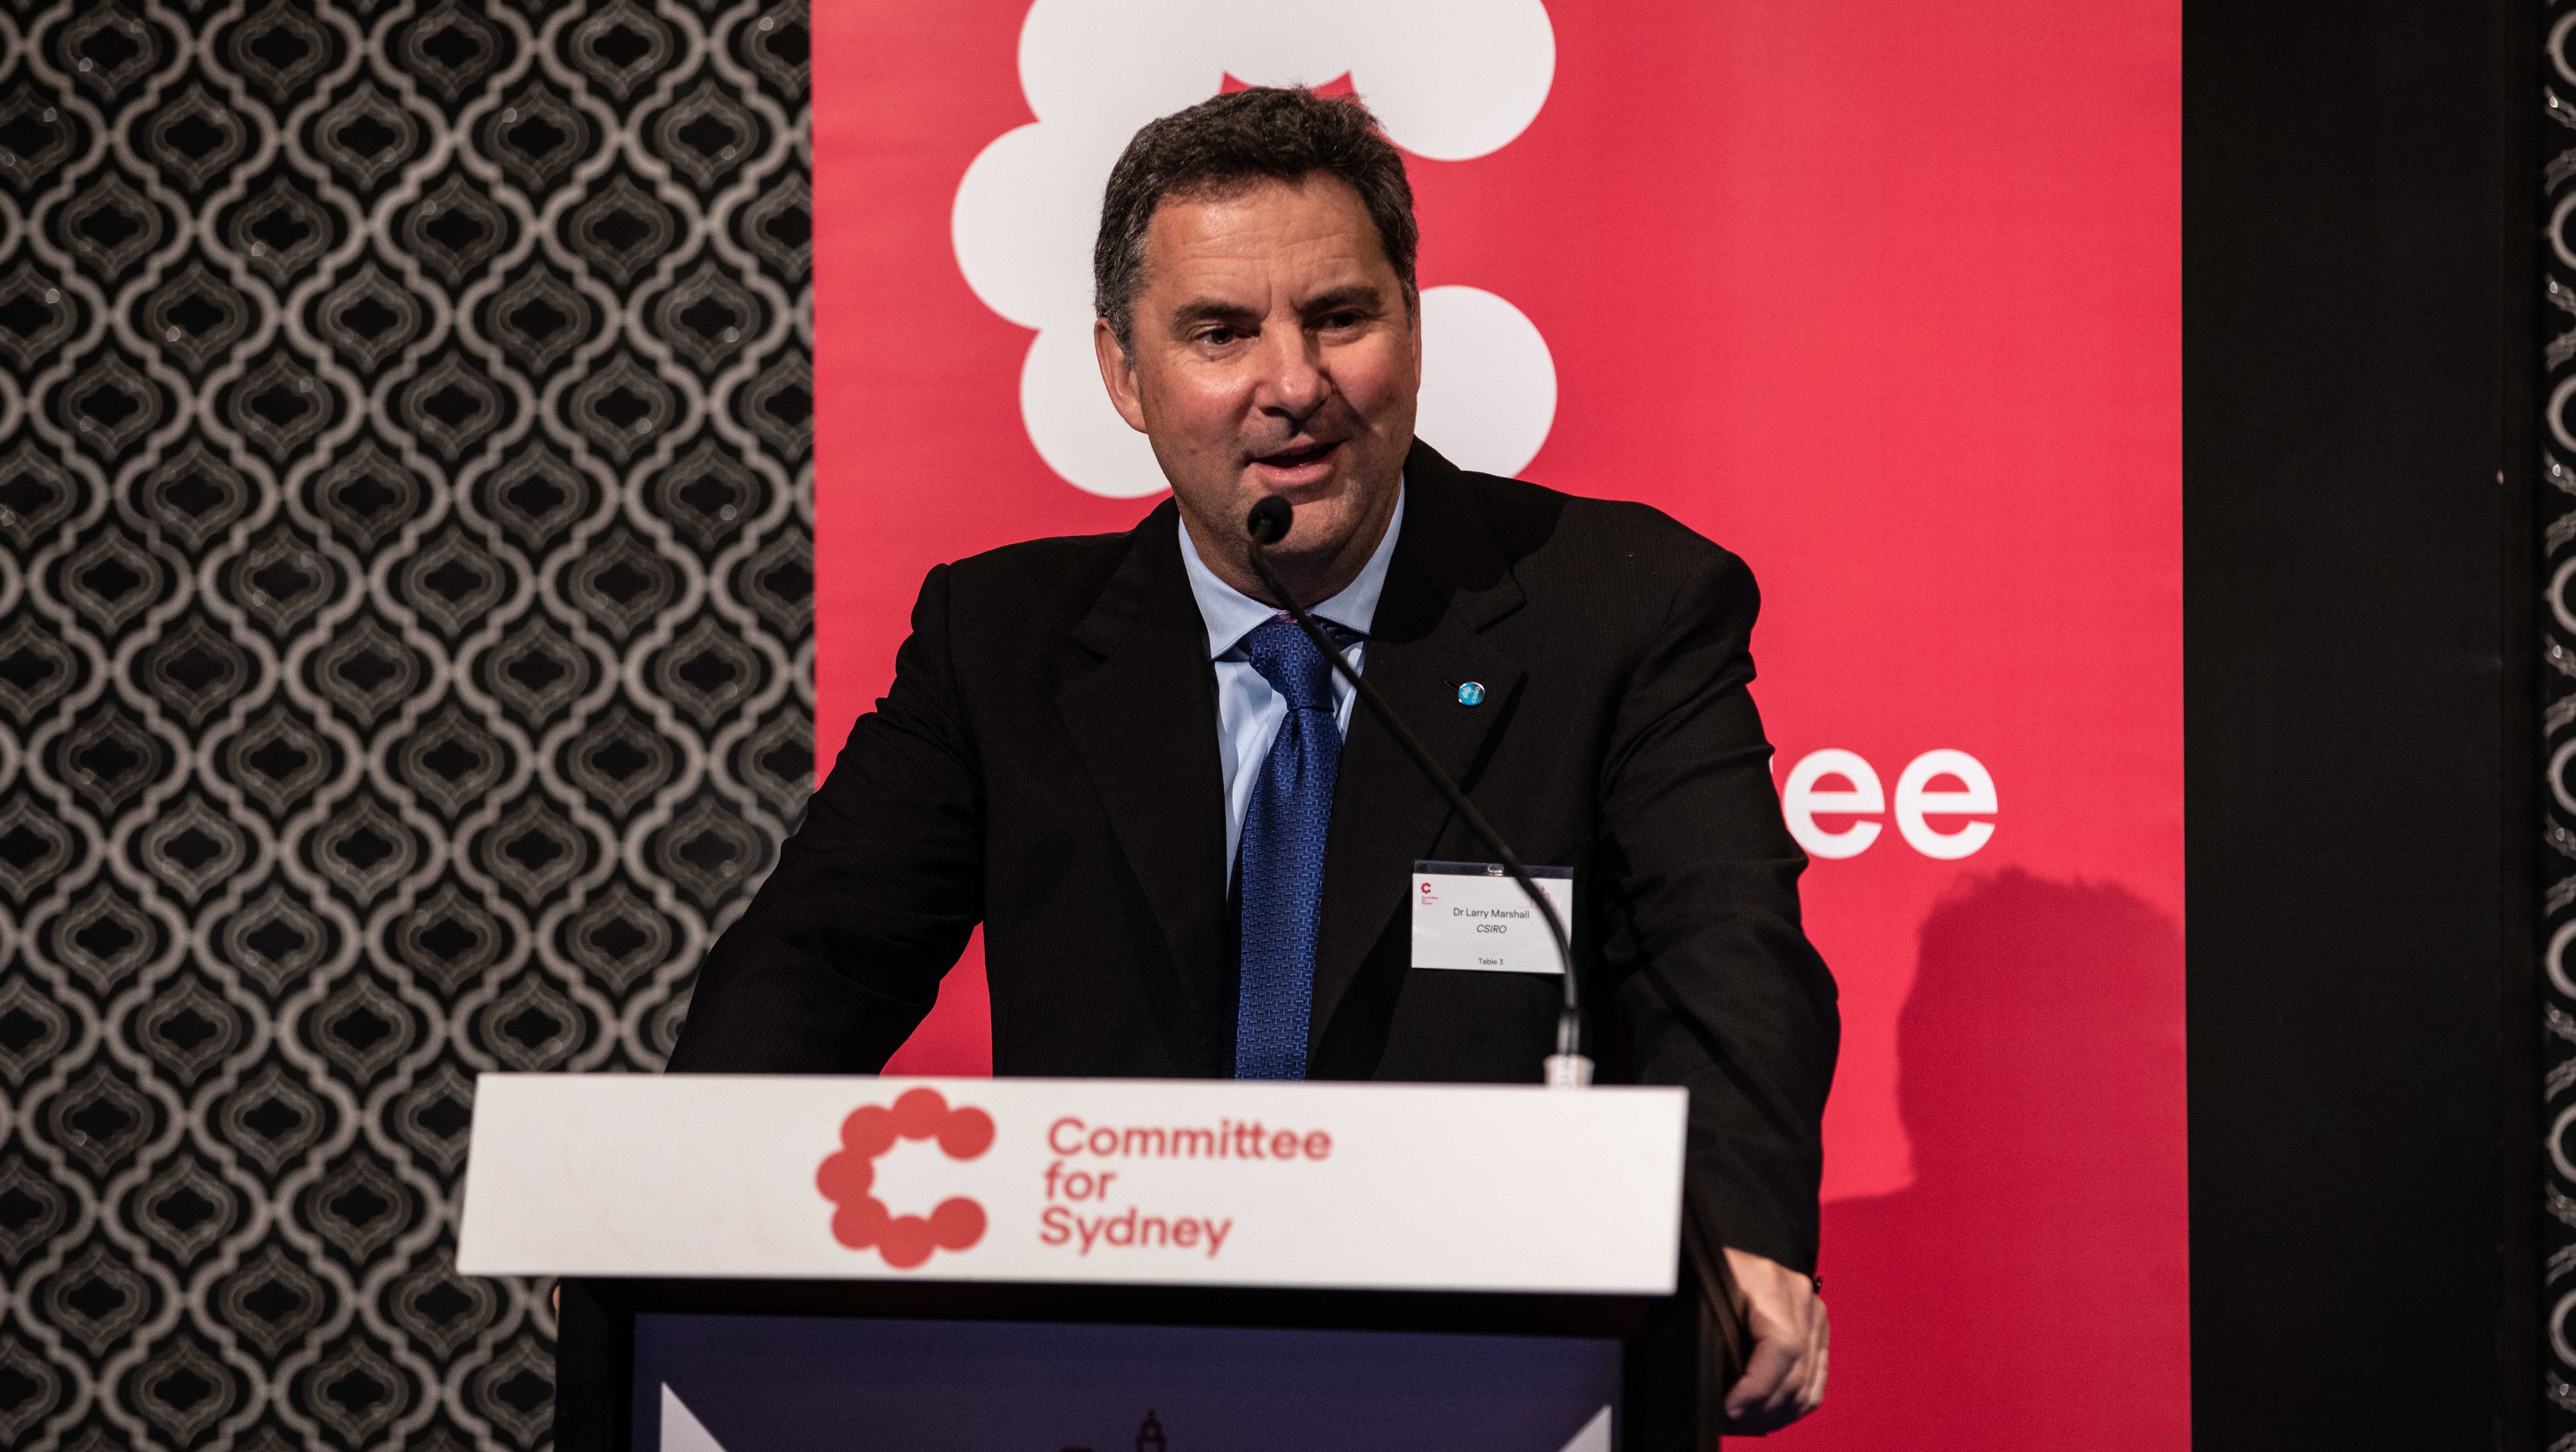 Science can ease the squeeze says CSIRO Chief